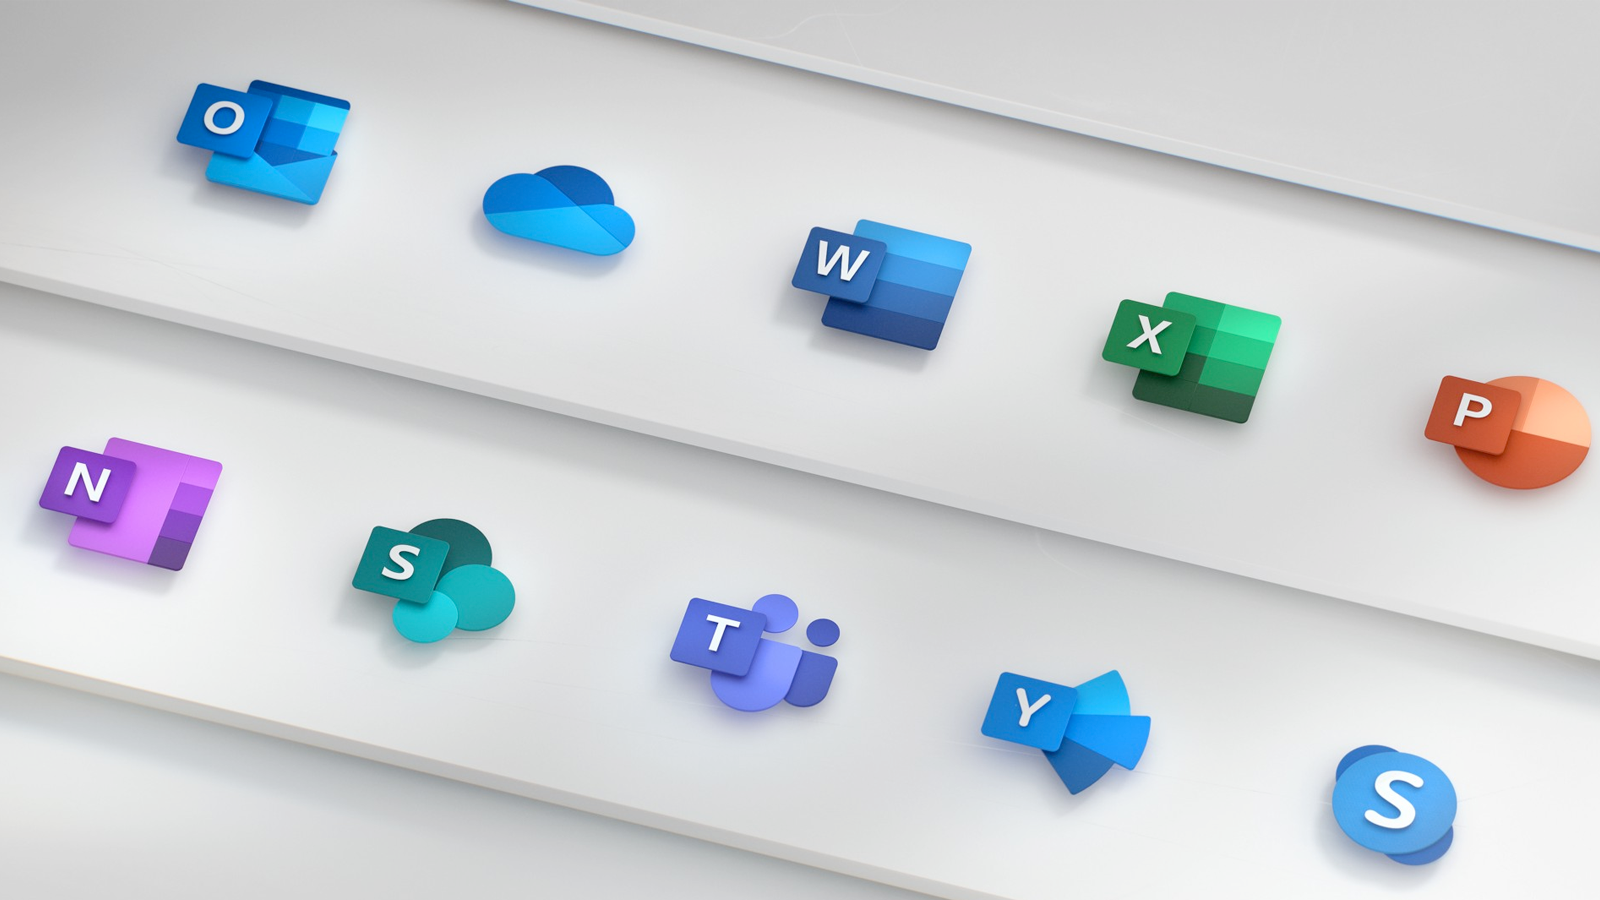 The logos for Outlook, Word, Excel, Powerpoint, and other Microsoft software.